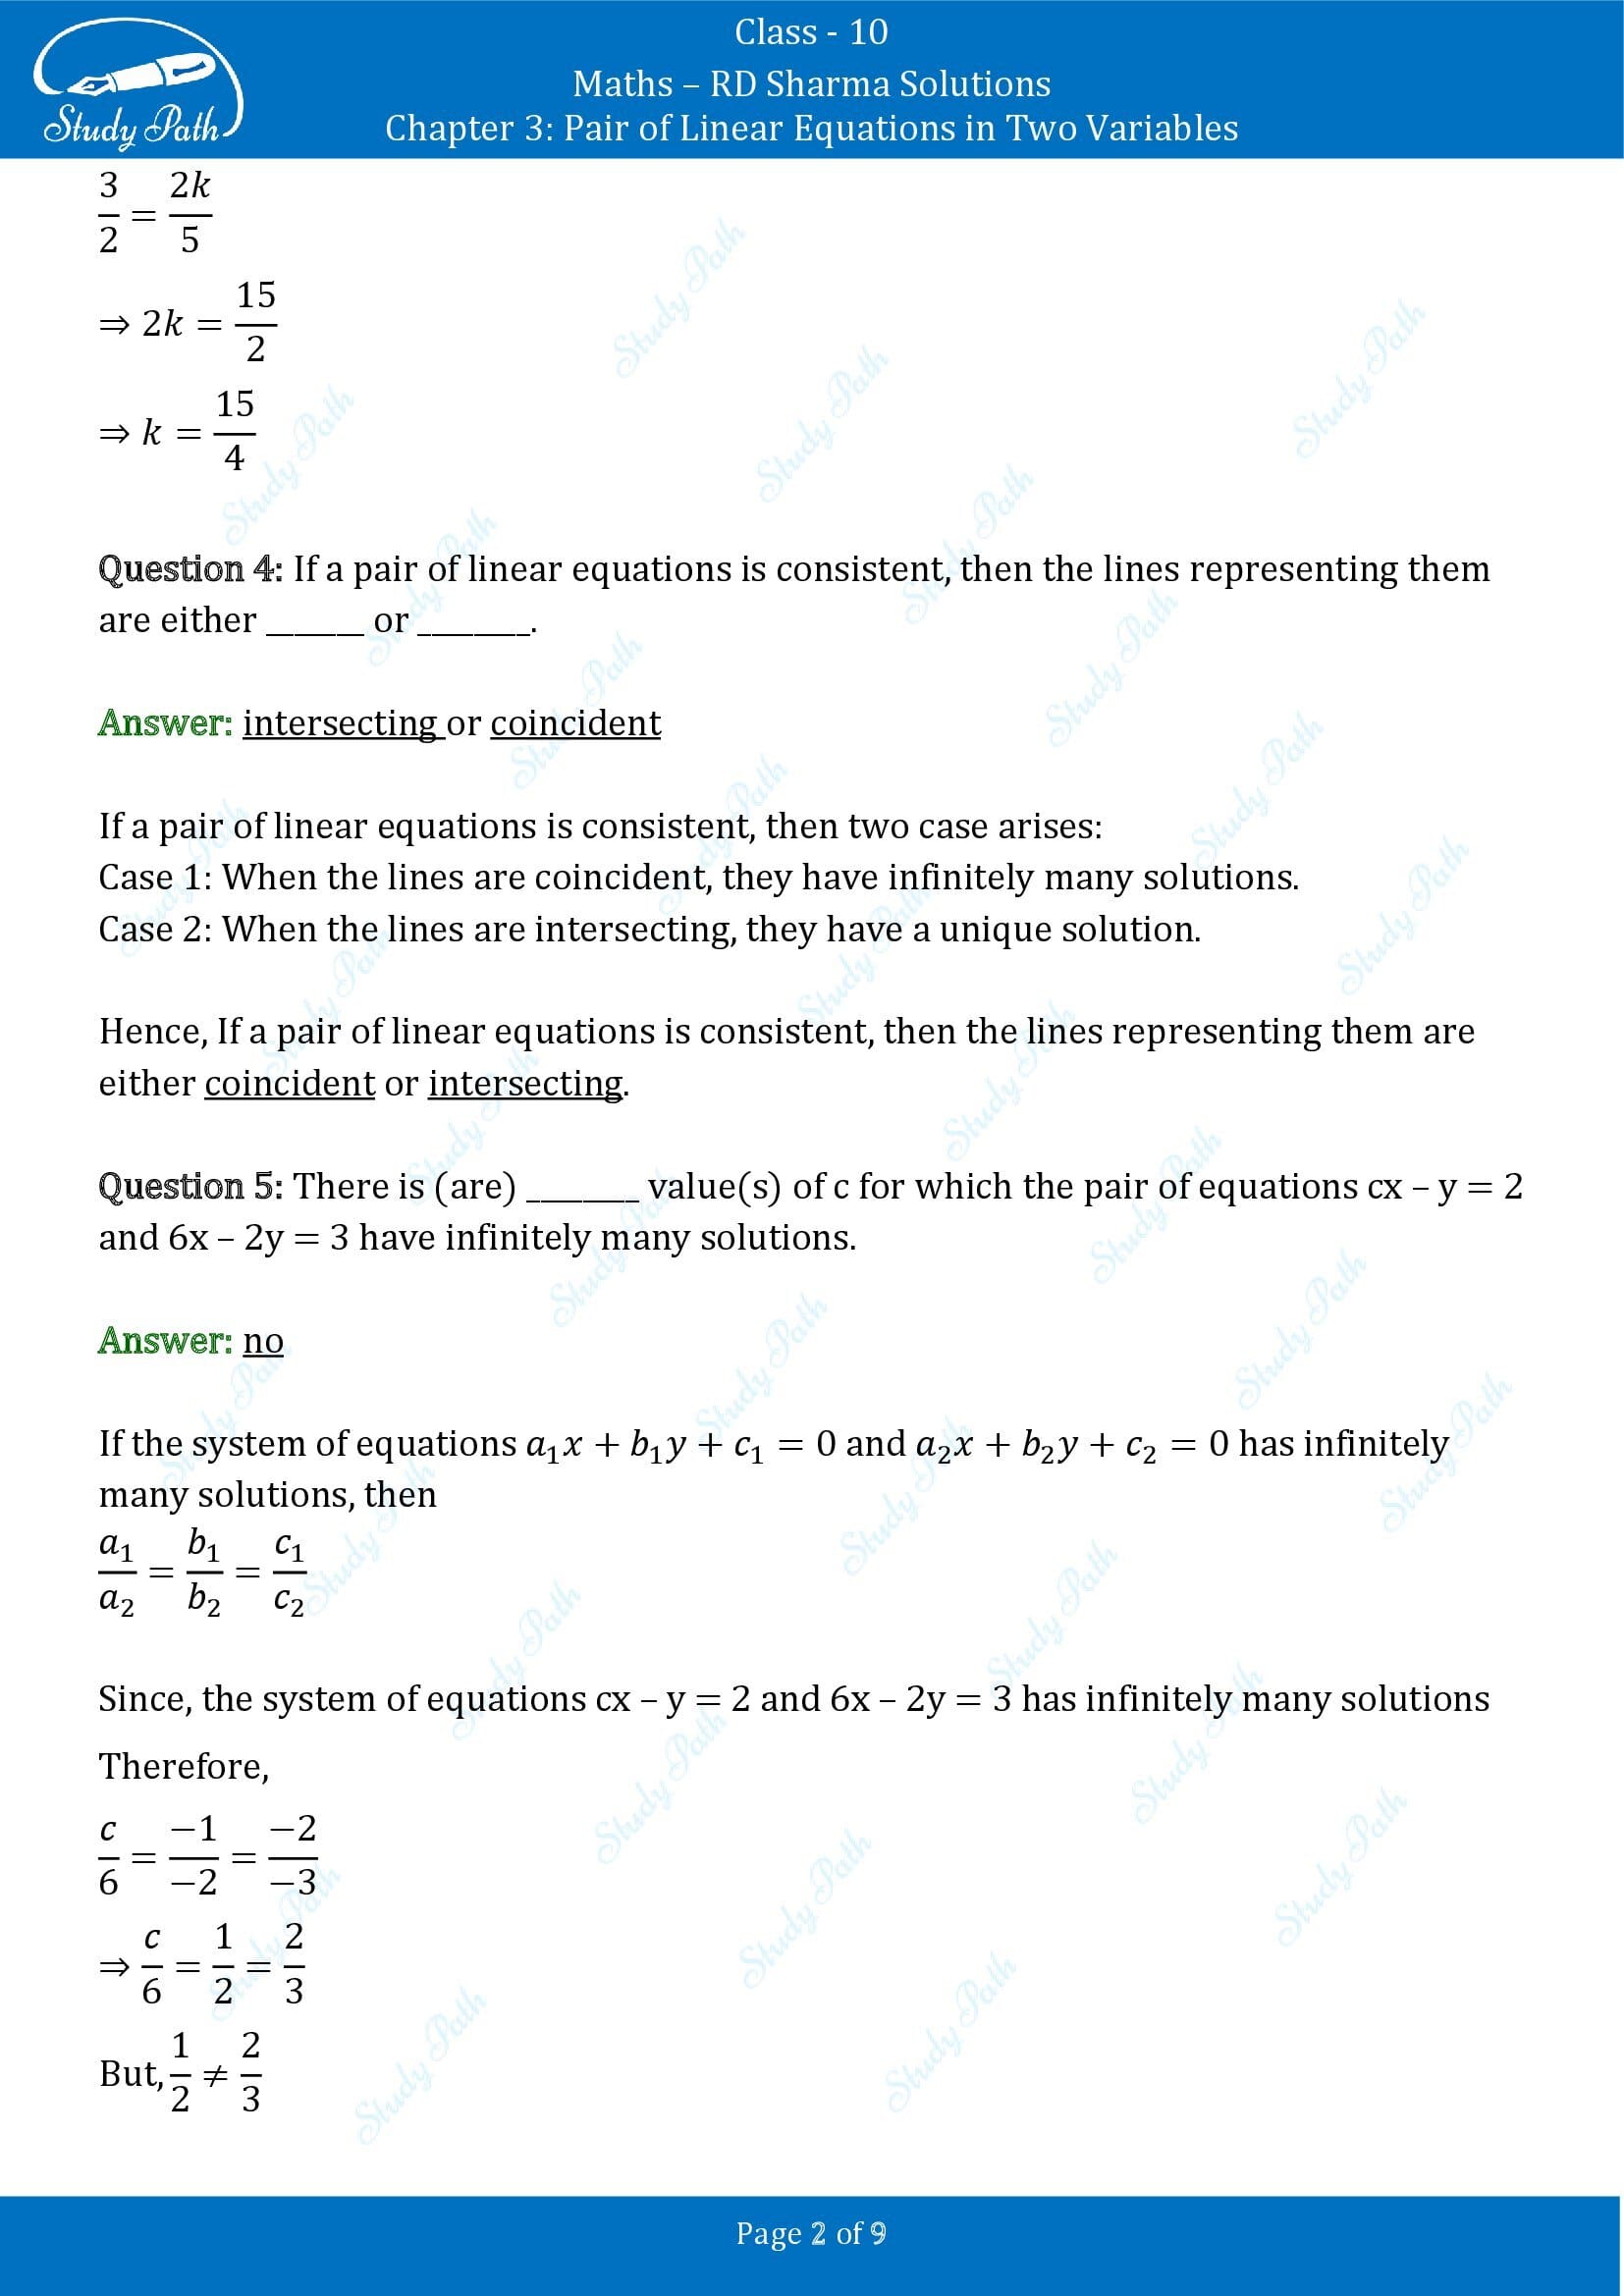 RD Sharma Solutions Class 10 Chapter 3 Pair of Linear Equations in Two Variables Exercise Fill in the Blank Type Questions FBQs 00002